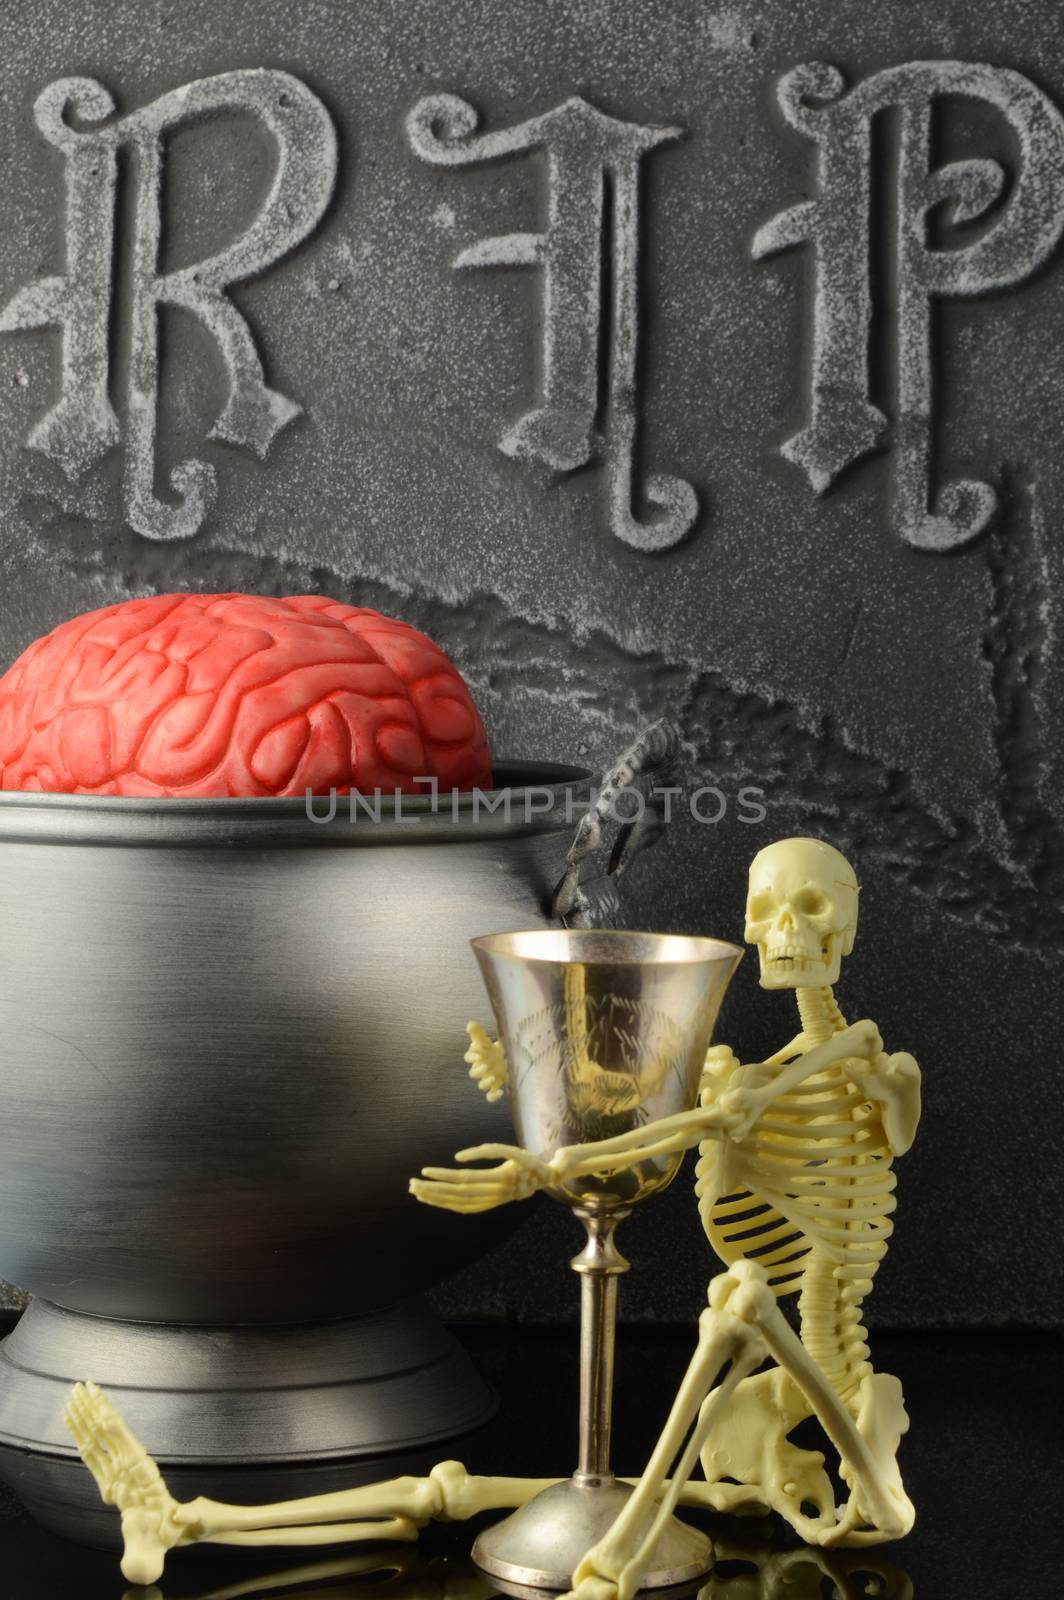 A fresh pot of brain stew being brewed for Halloween.